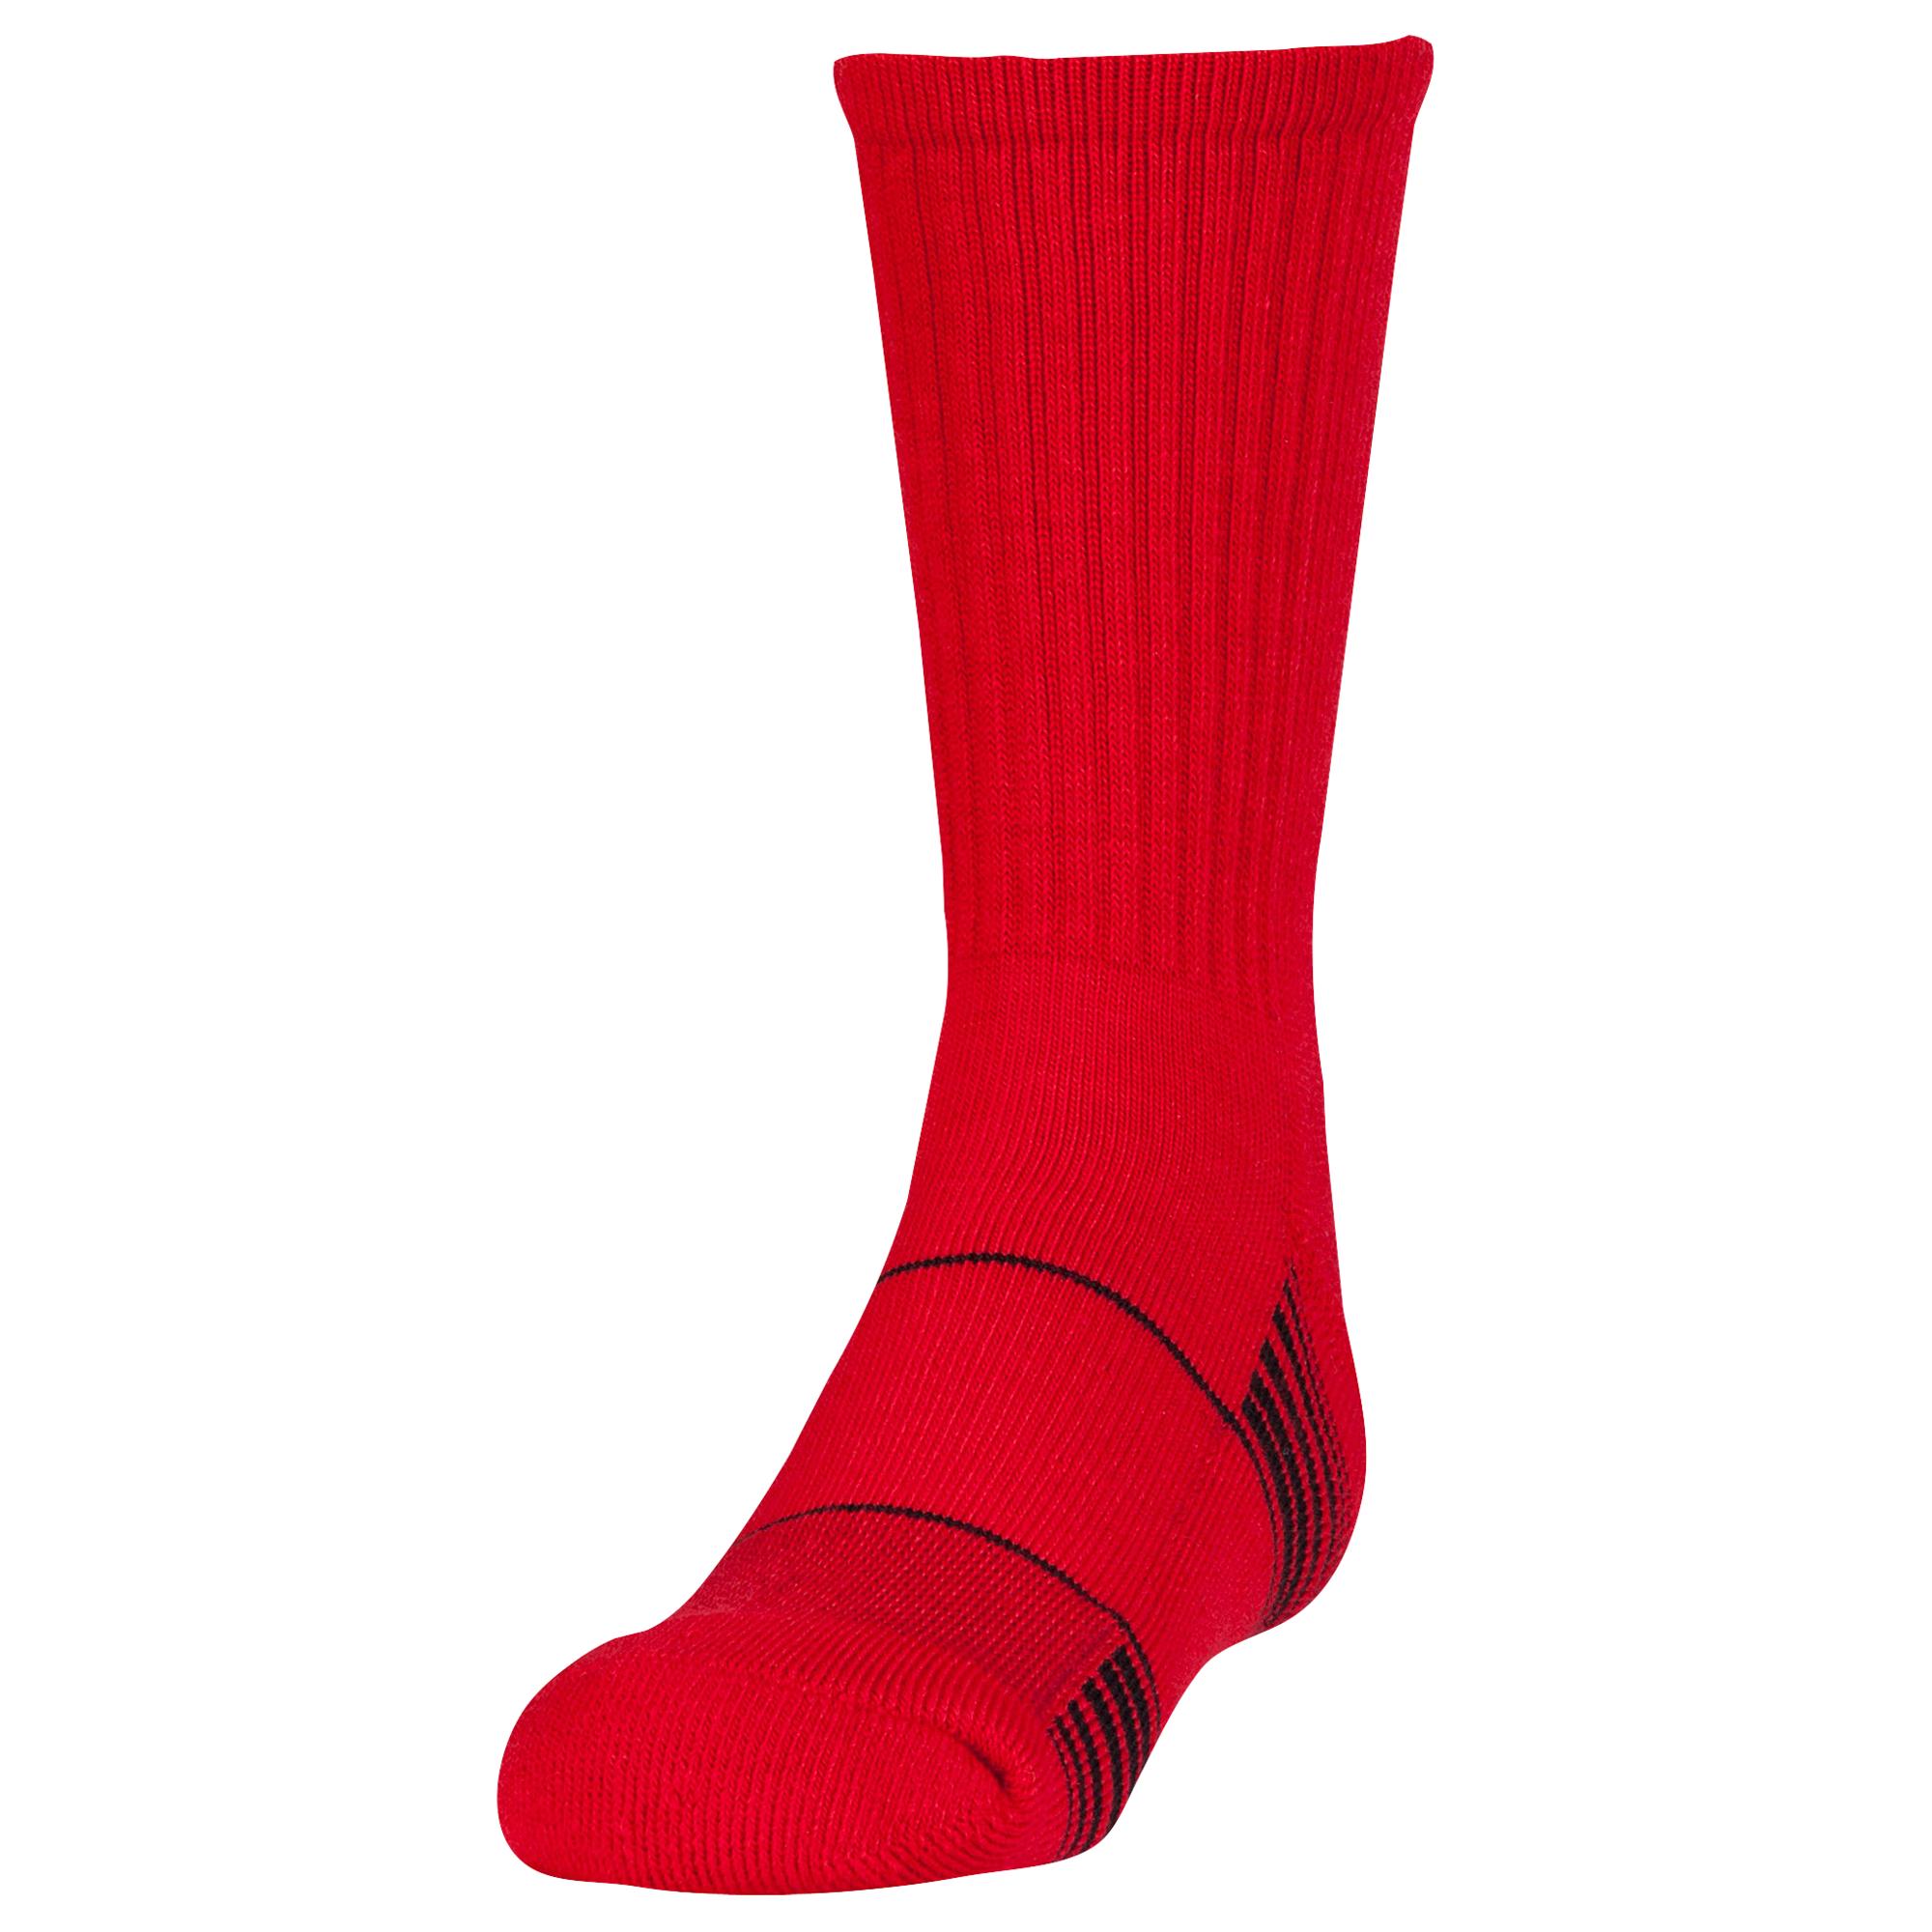 Under Armour Team Crew Socks in Red for Men - Save 33% - Lyst